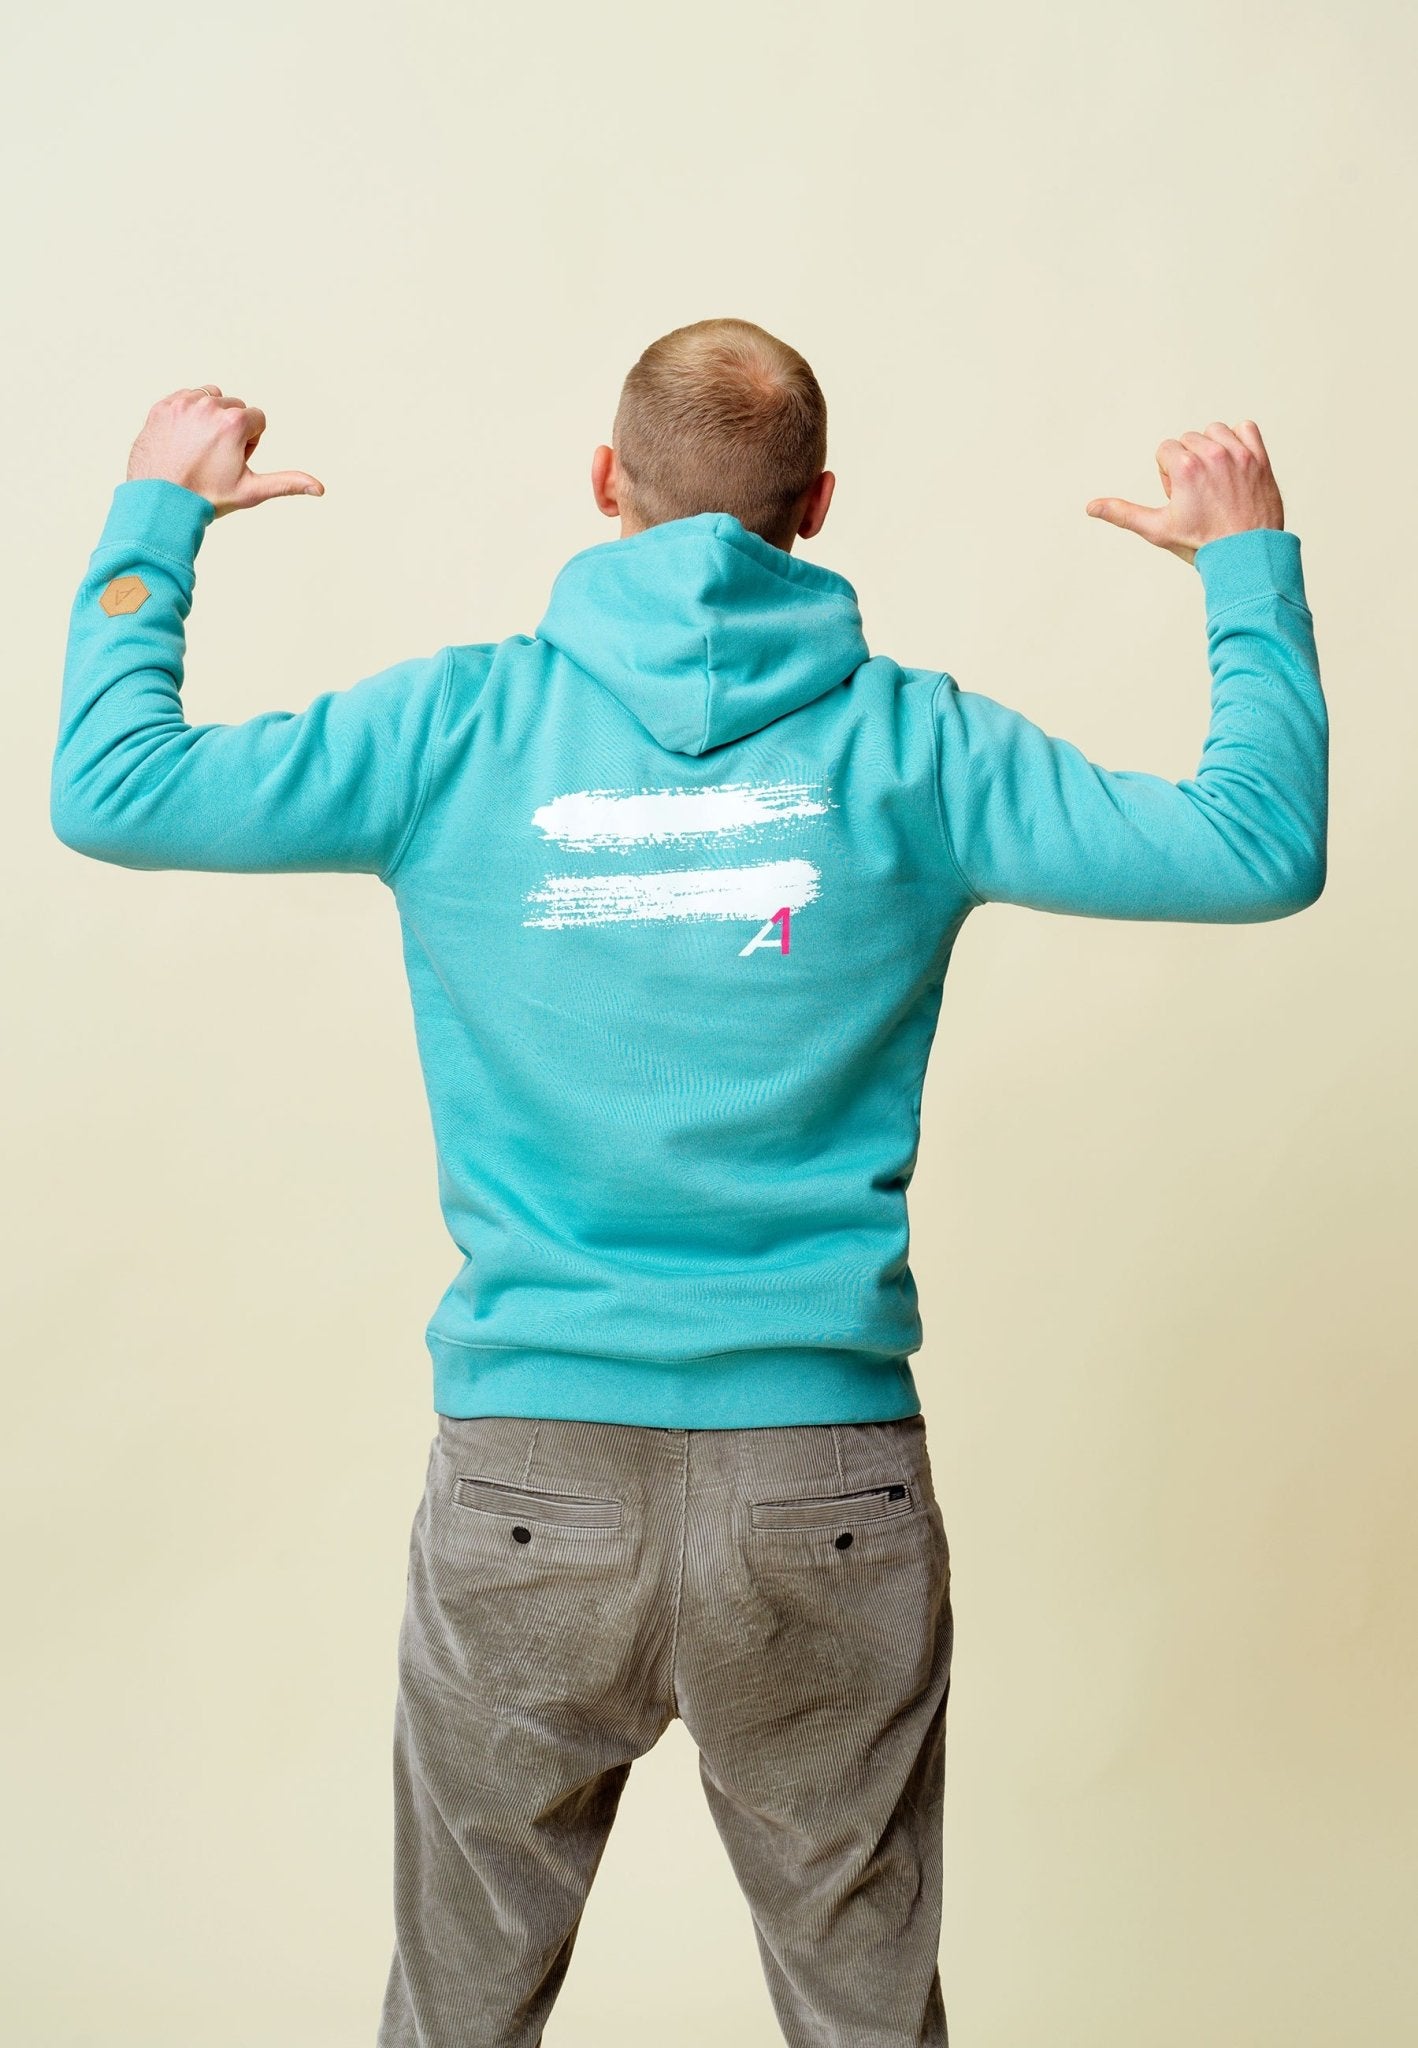 Unisex Hoodie Alex Schlager teal - wise enough